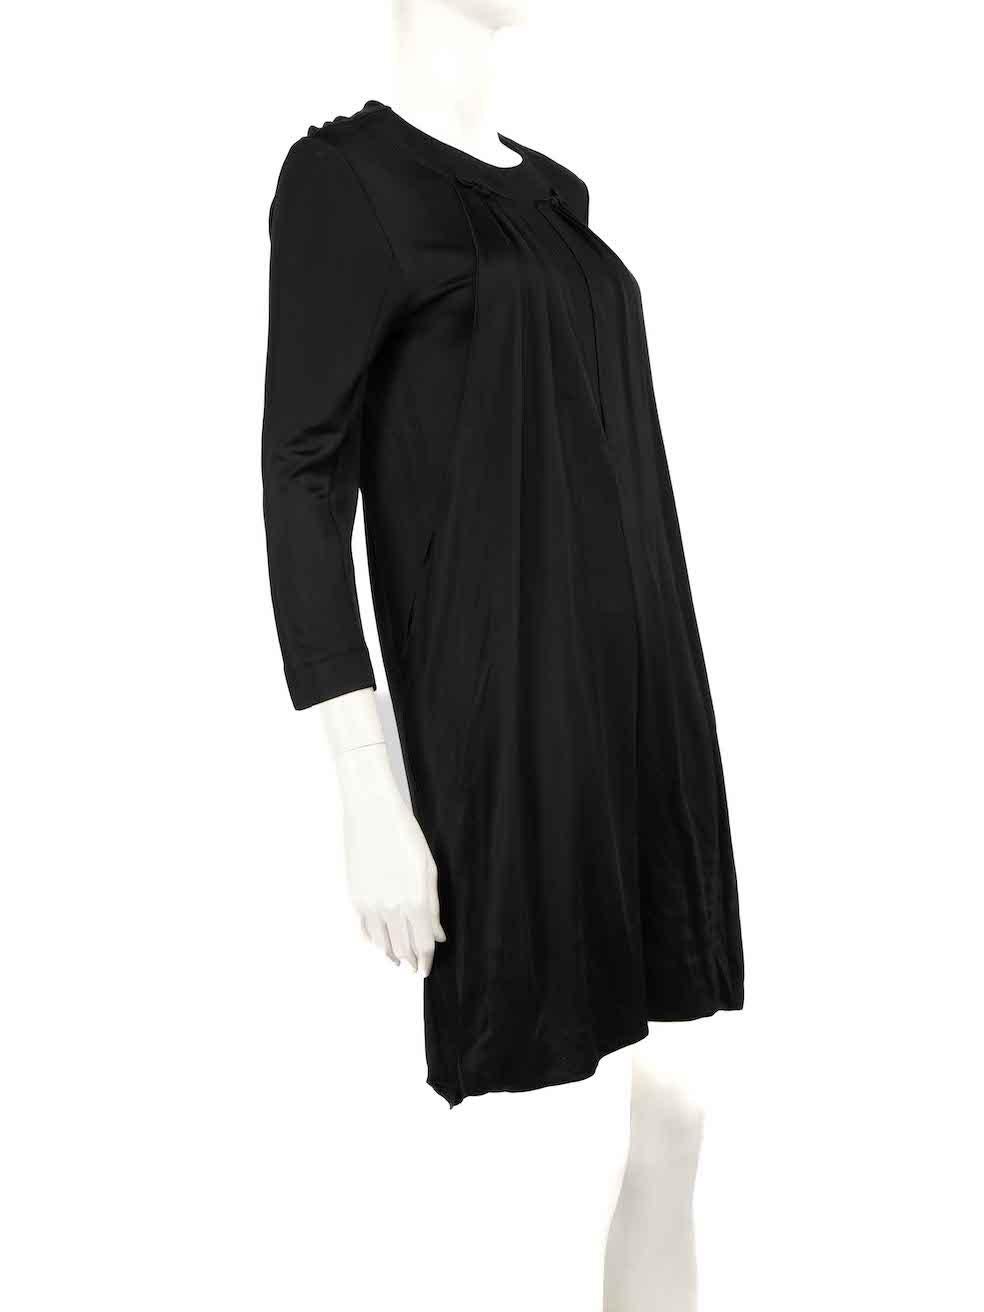 CONDITION is Very good. Minimal wear to dress is evident. The seam is loosened on the back hemline of this used Miu Miu designer resale item.
 
 
 
 Details
 
 
 Black
 
 Viscose
 
 Mini dress
 
 Drape detail on front
 
 Round neckline
 
 Mid